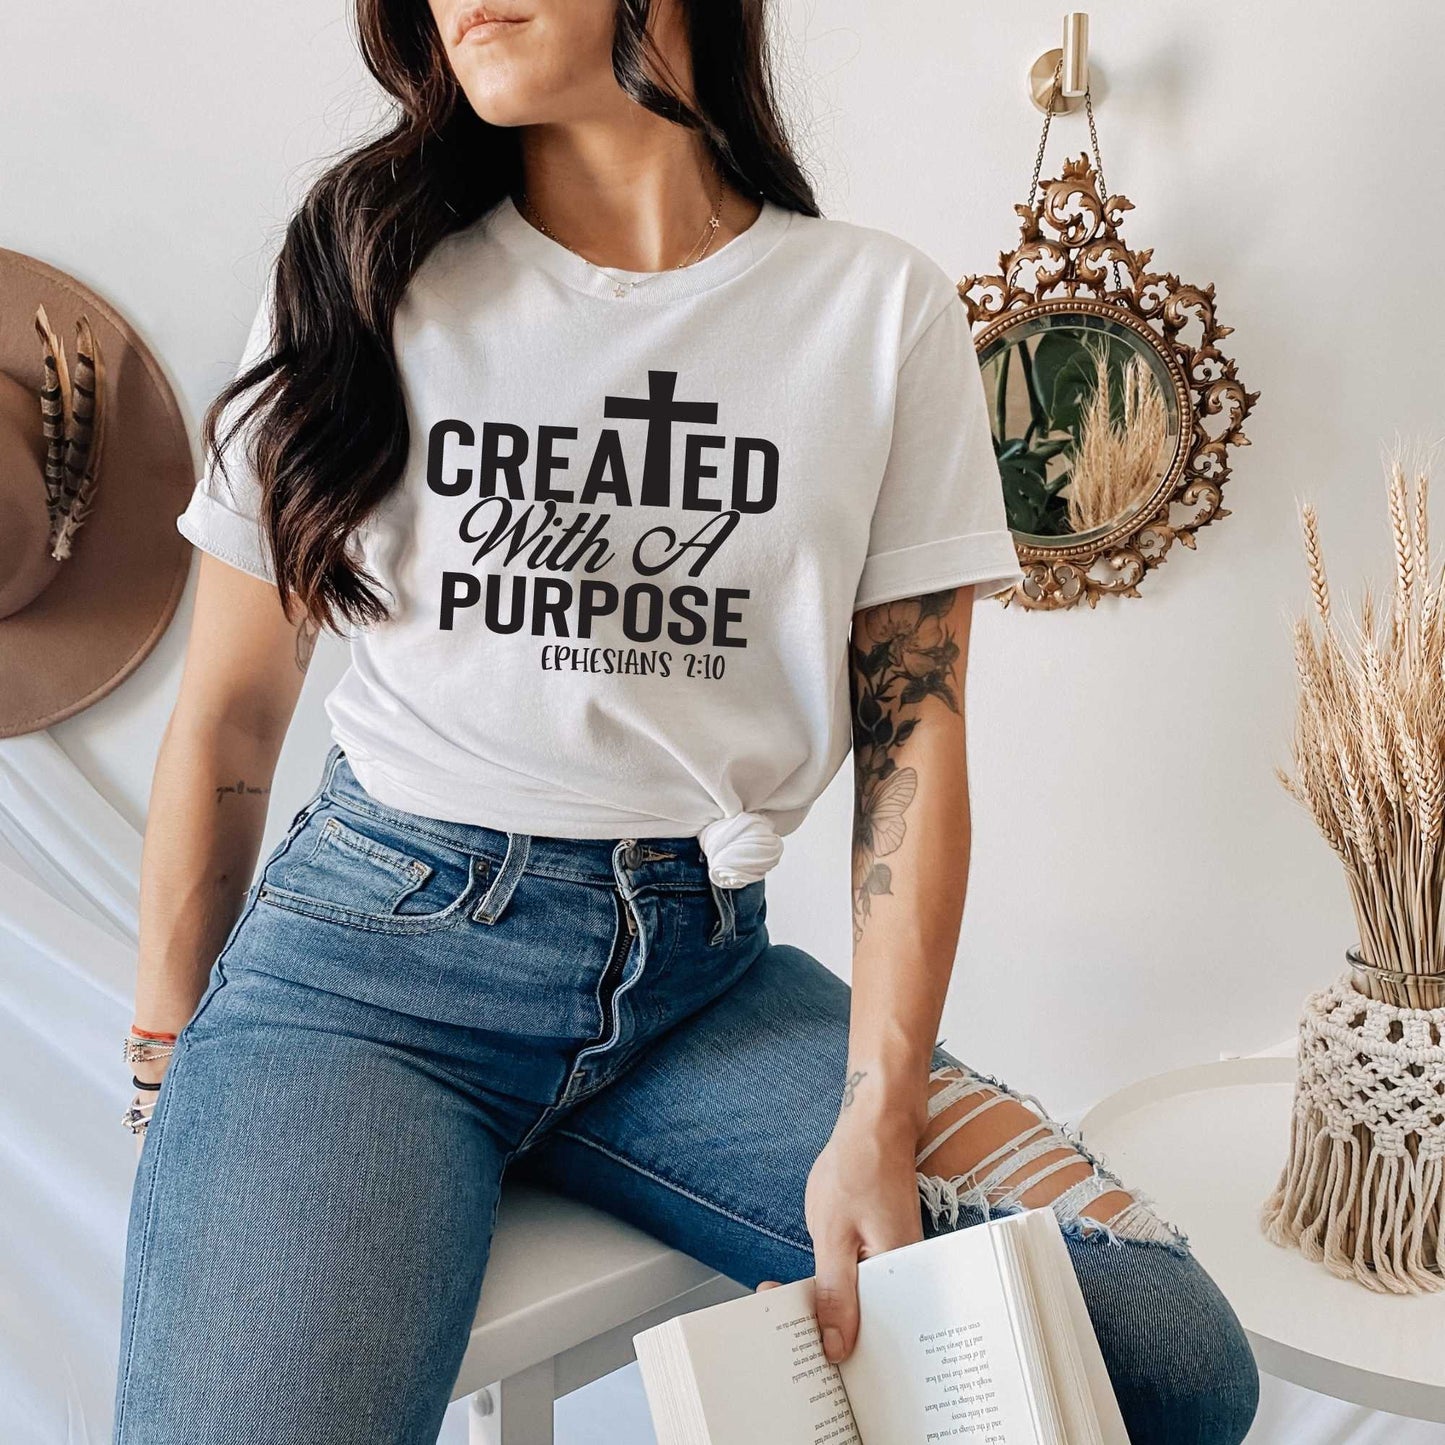 Created with a Purpose, Faith Based T-Shirts